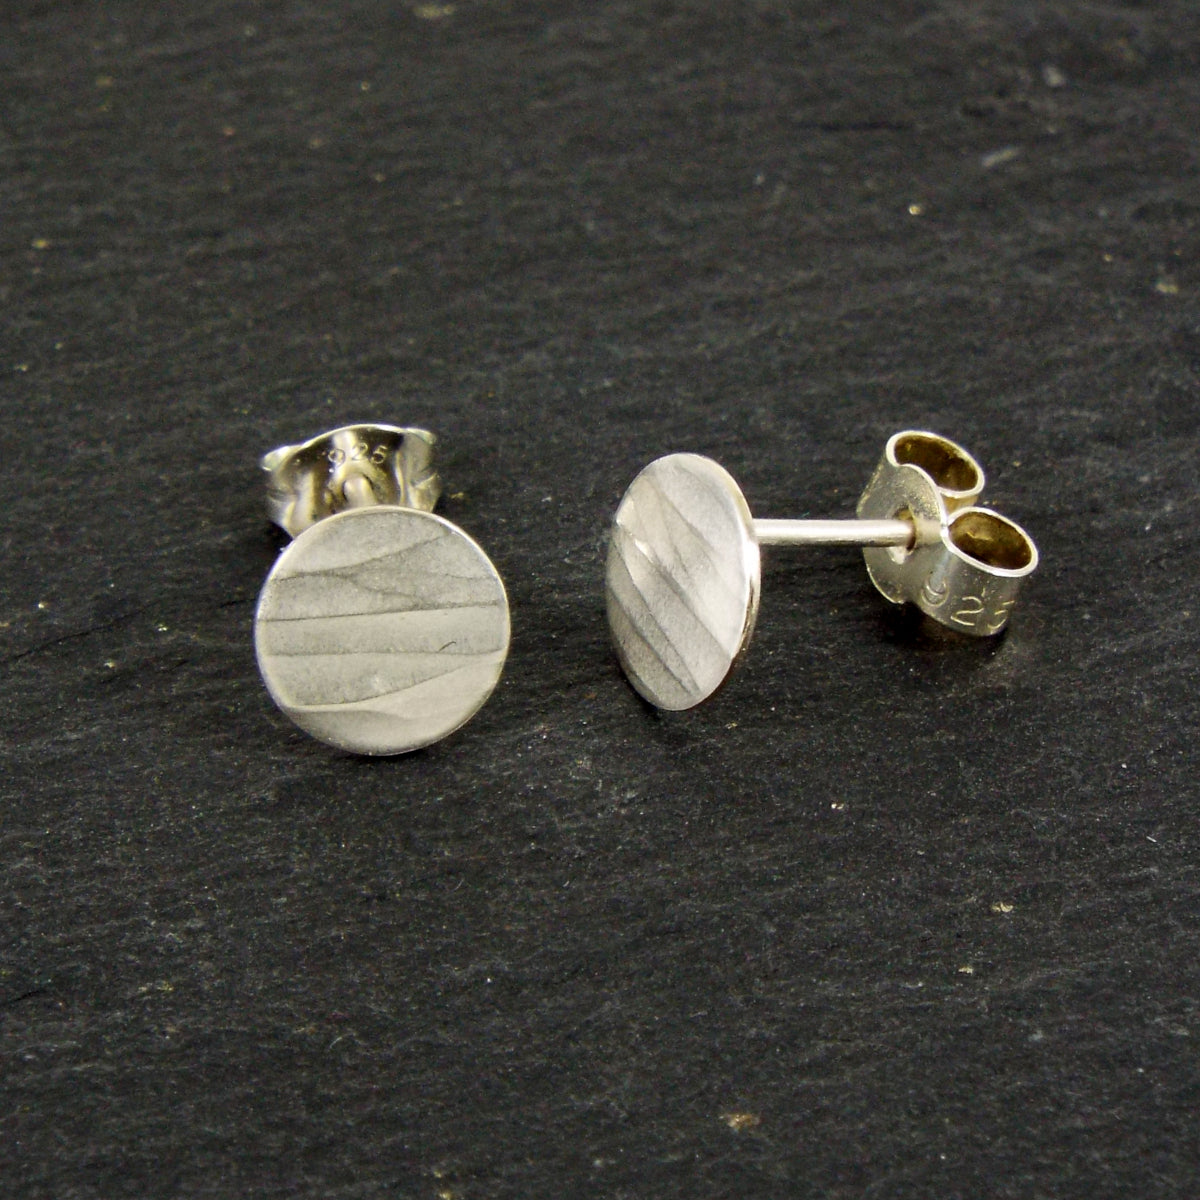 A pair of disc-shaped hammered silver earrings, 7.5mm across, with a satin-matte finish. The hammered texture of the studs is strongly horizontal.